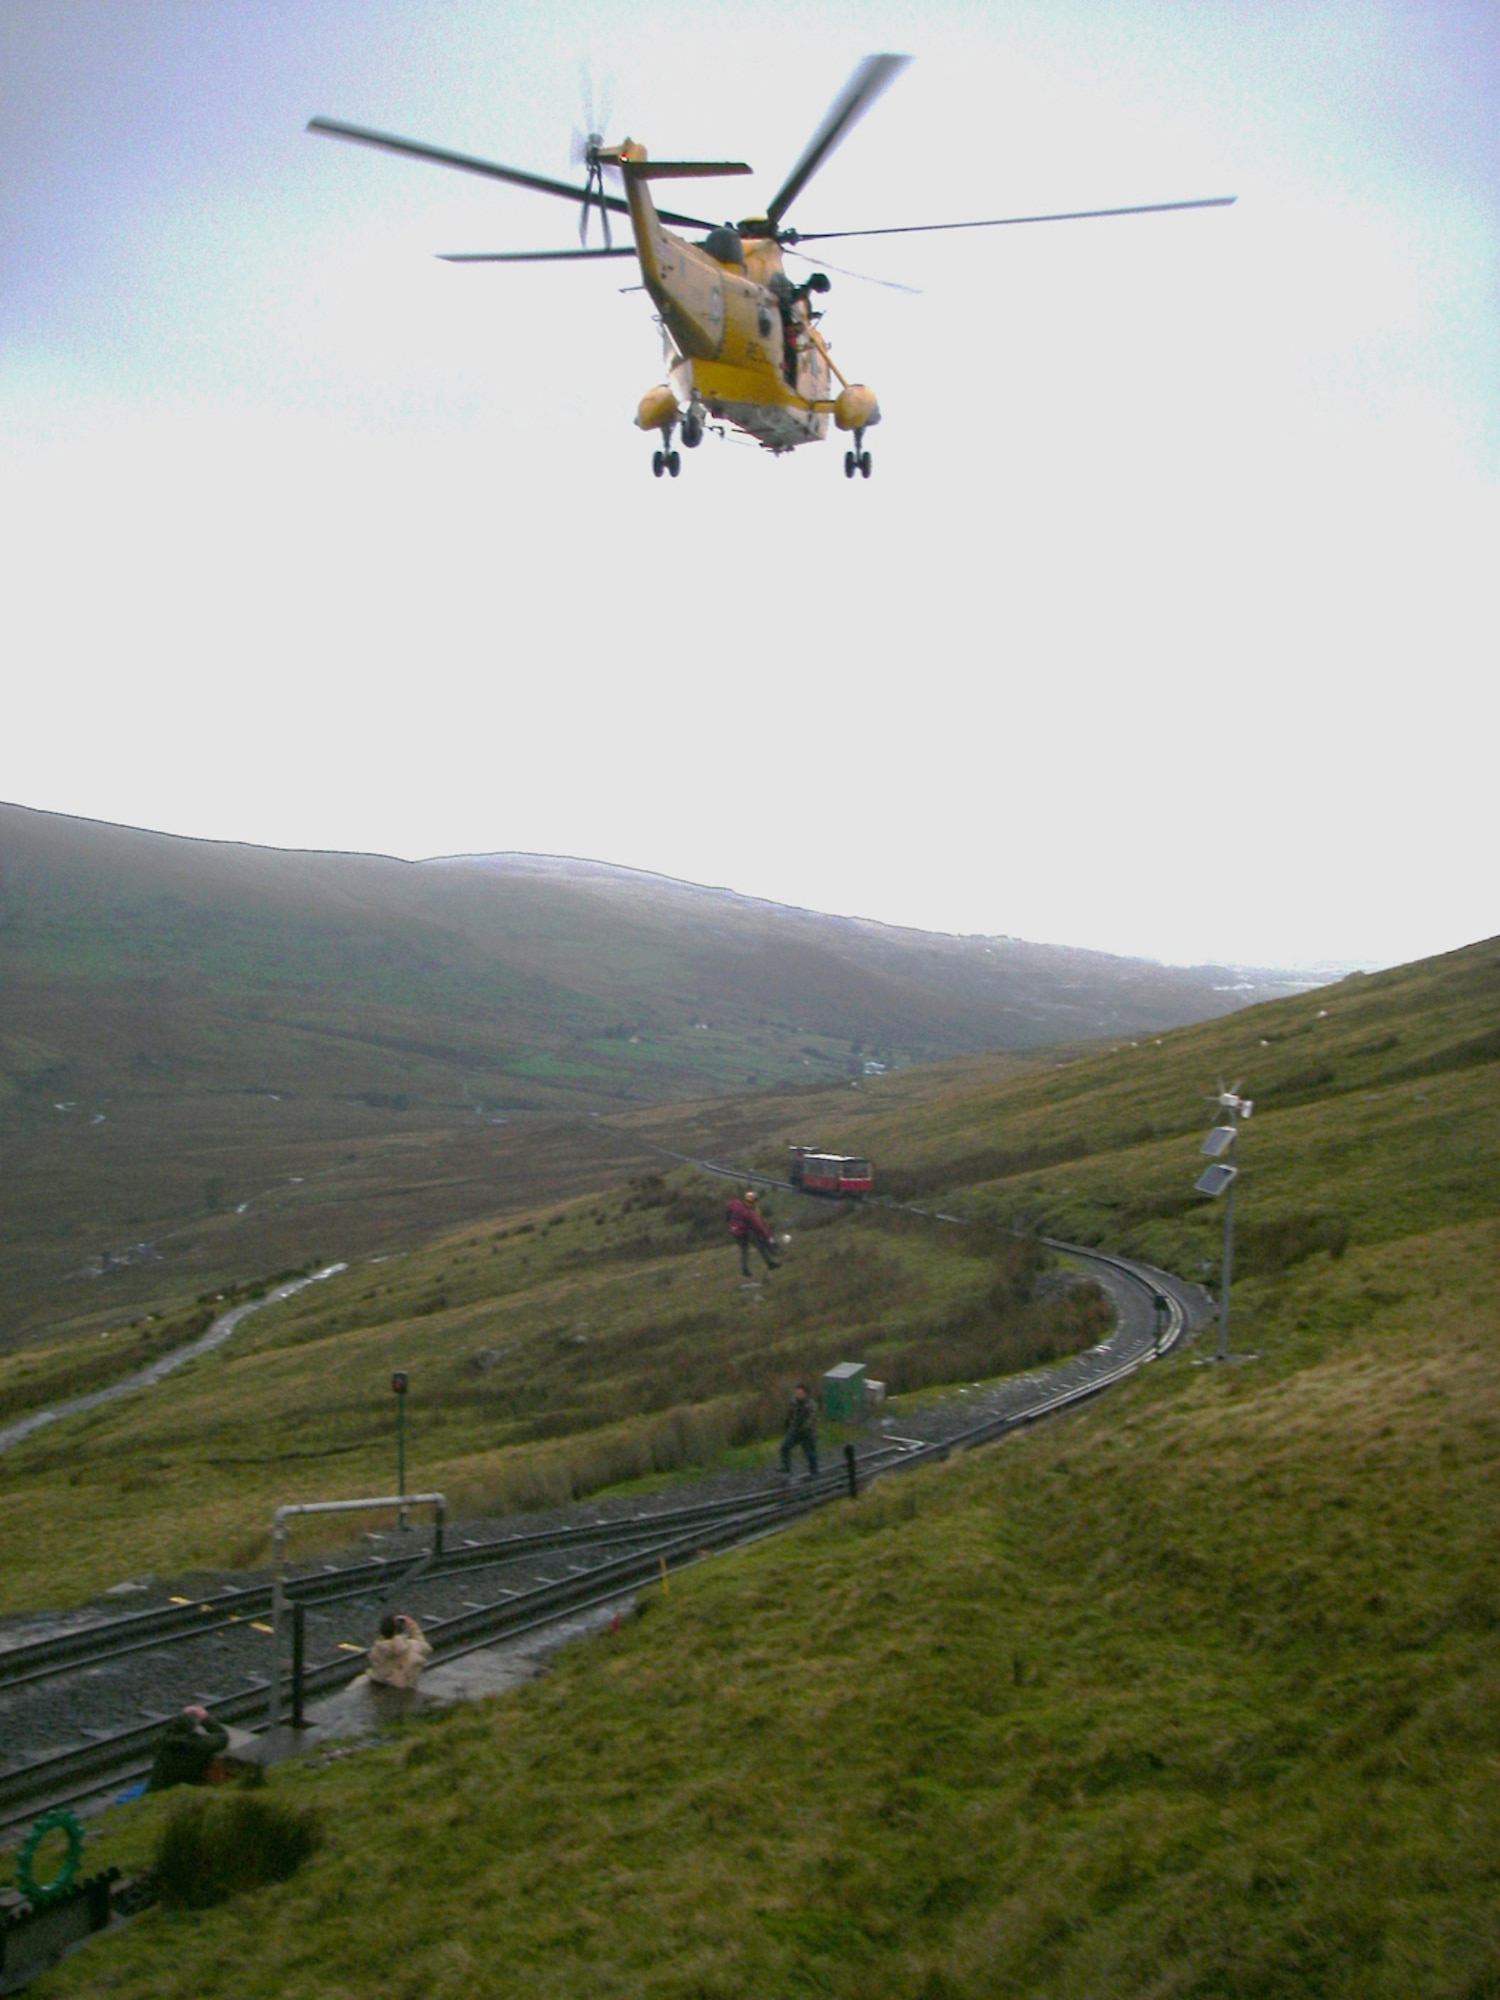 A rescue helicopter from 22 Squadron, RAF Valley, Wales, winches up the casualty from halfway down Mount Snowdon, ready to take him to the hospital. Three Defence Fire Service firefighters, Alan Coldwell, Chris Gould, and Jerry Miles, all 100th Civil Engineer Squadron Fire Department, and their mountain guide, Dave Wainwright, 100th Force Support Squadron Outdoor Recreation, rescued the man they found alone and suffering from hypothermia and frostbite at the peak of Mount Snowdon Oct. 3. After calling emergency services, the four helped bring him halfway down the mountain, with the help of passengers on a train from Snowdon Mountain Railway. The train never usually runs at this time of the year as the weather is too bad, but by coincidence, it was taking passengers to the top of Mount Snowdon at the same time the firefighters found the man. (Courtesy photo by Doug Blair, Snowdon Mountain Railway)